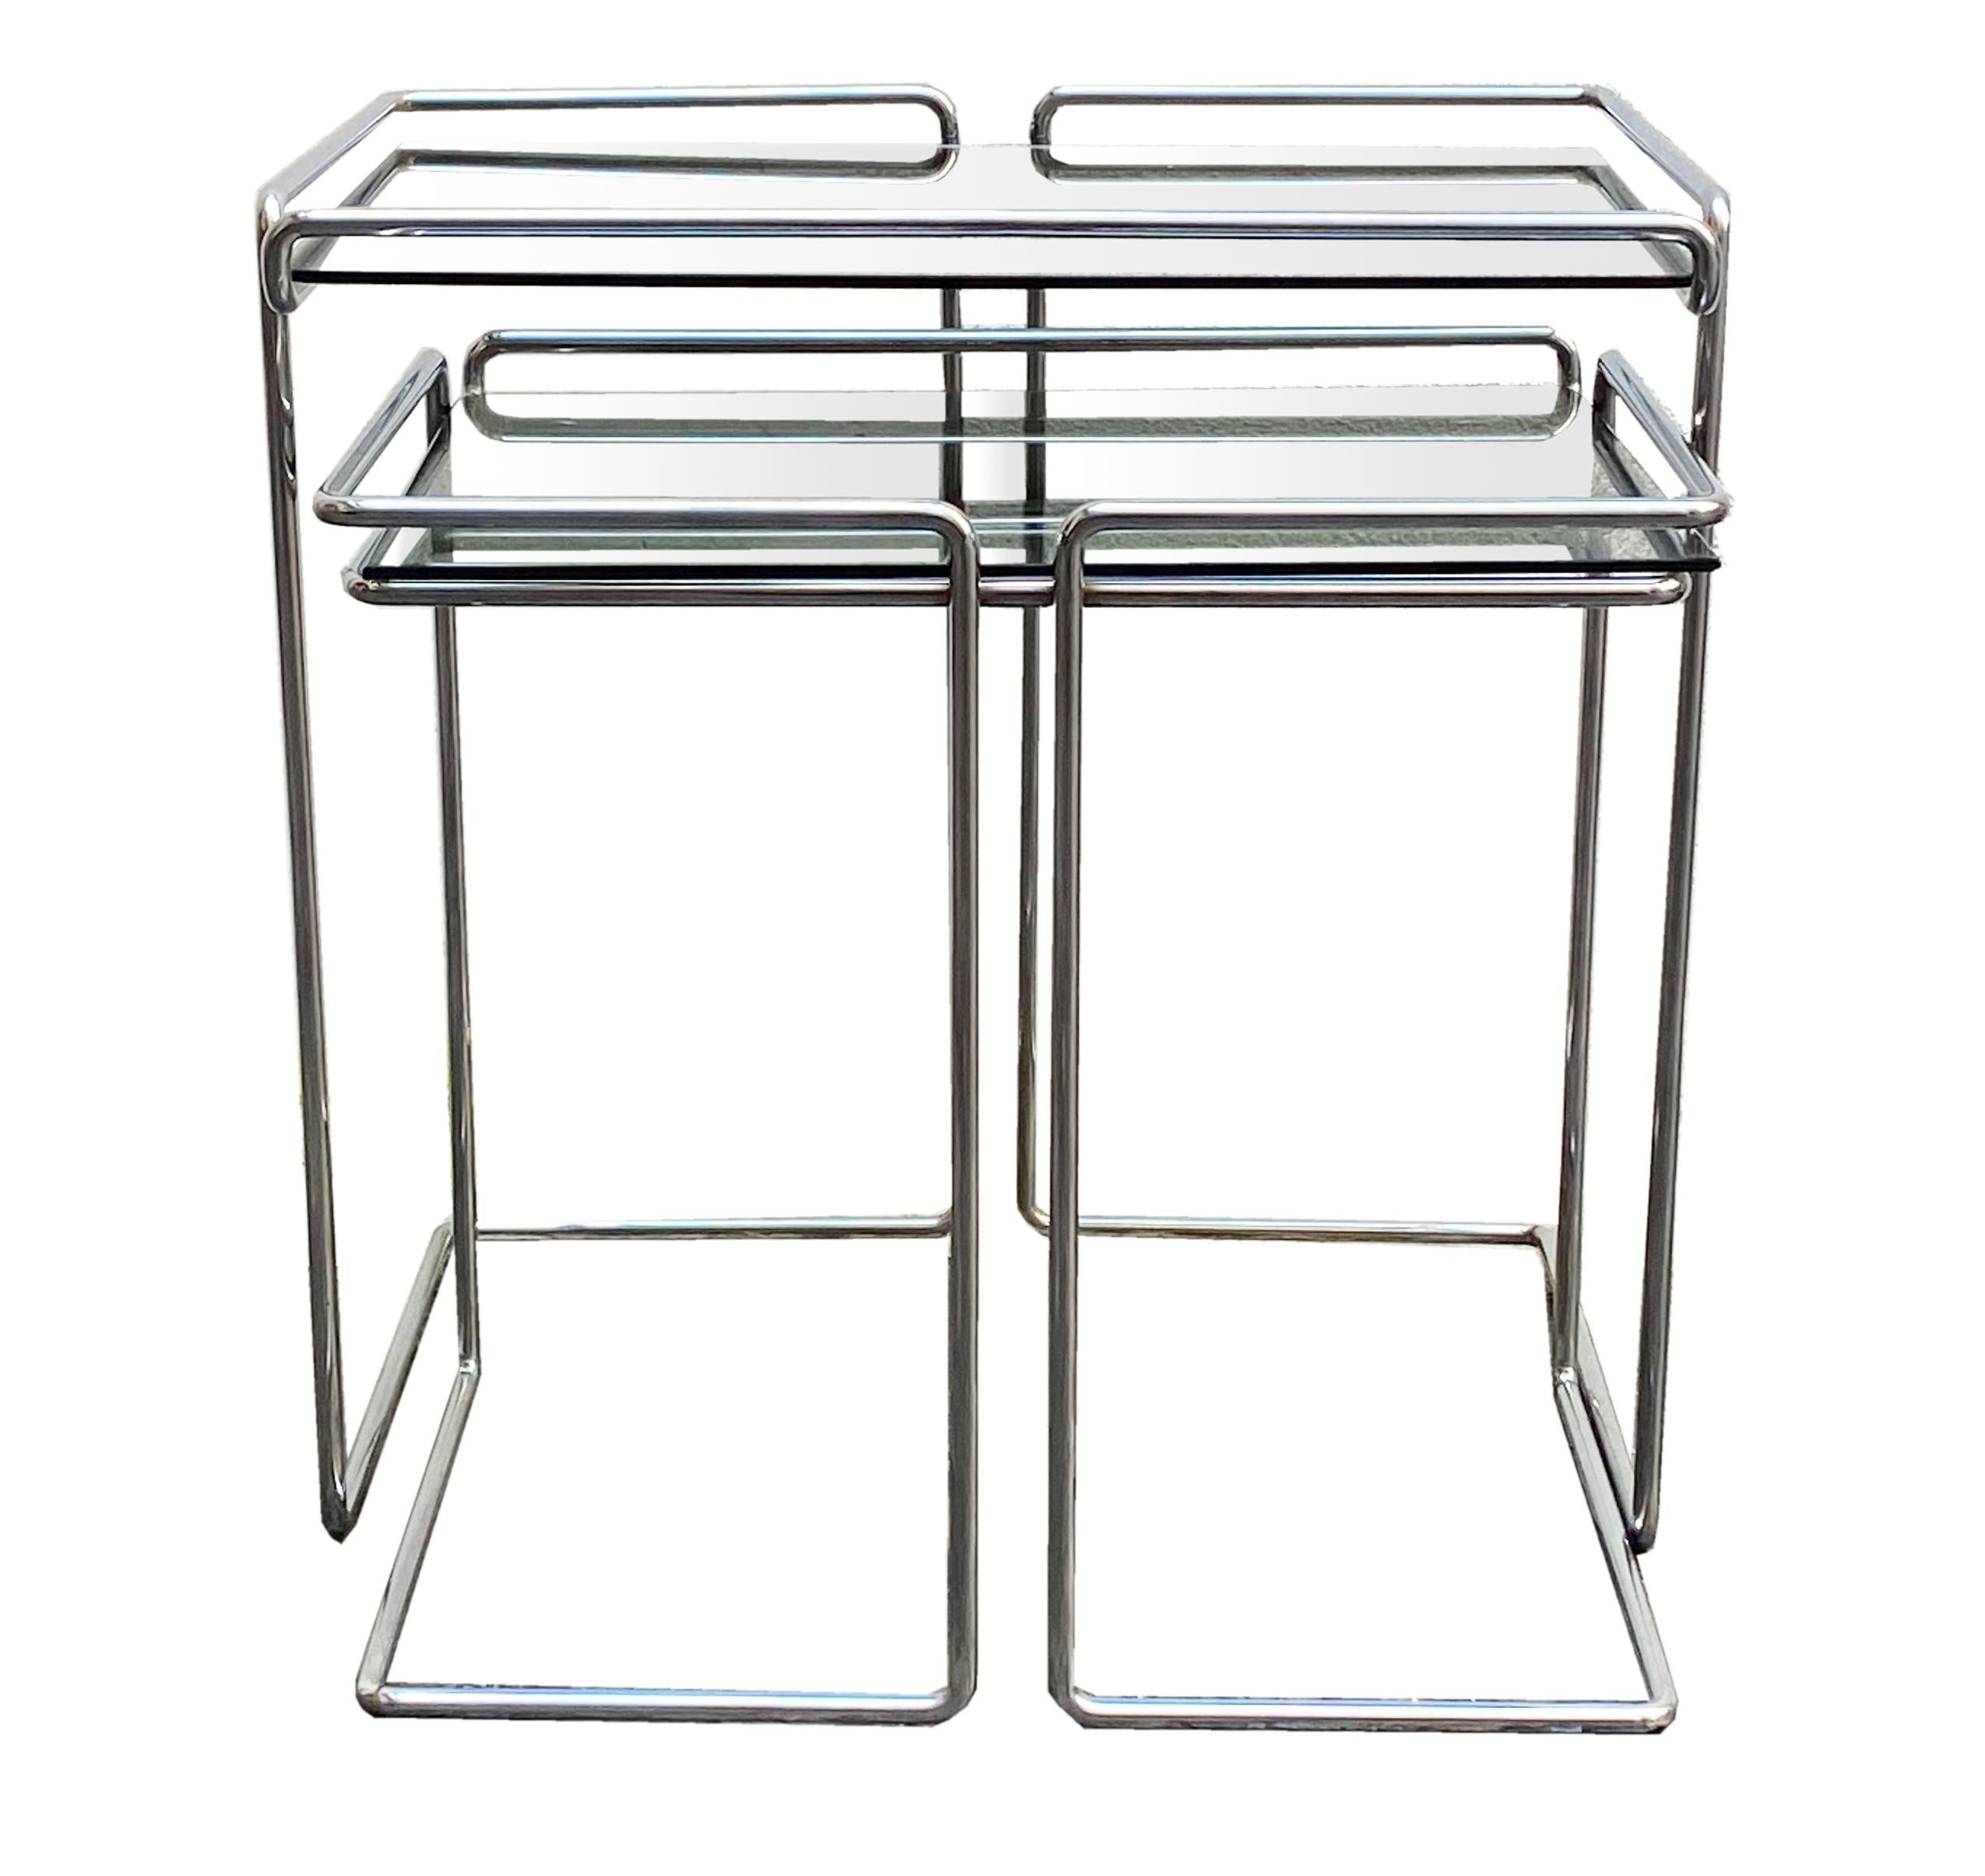 Set of two stackable coffee tables, with chromed tubular base and glass shelves, Italian manufacture 1970.